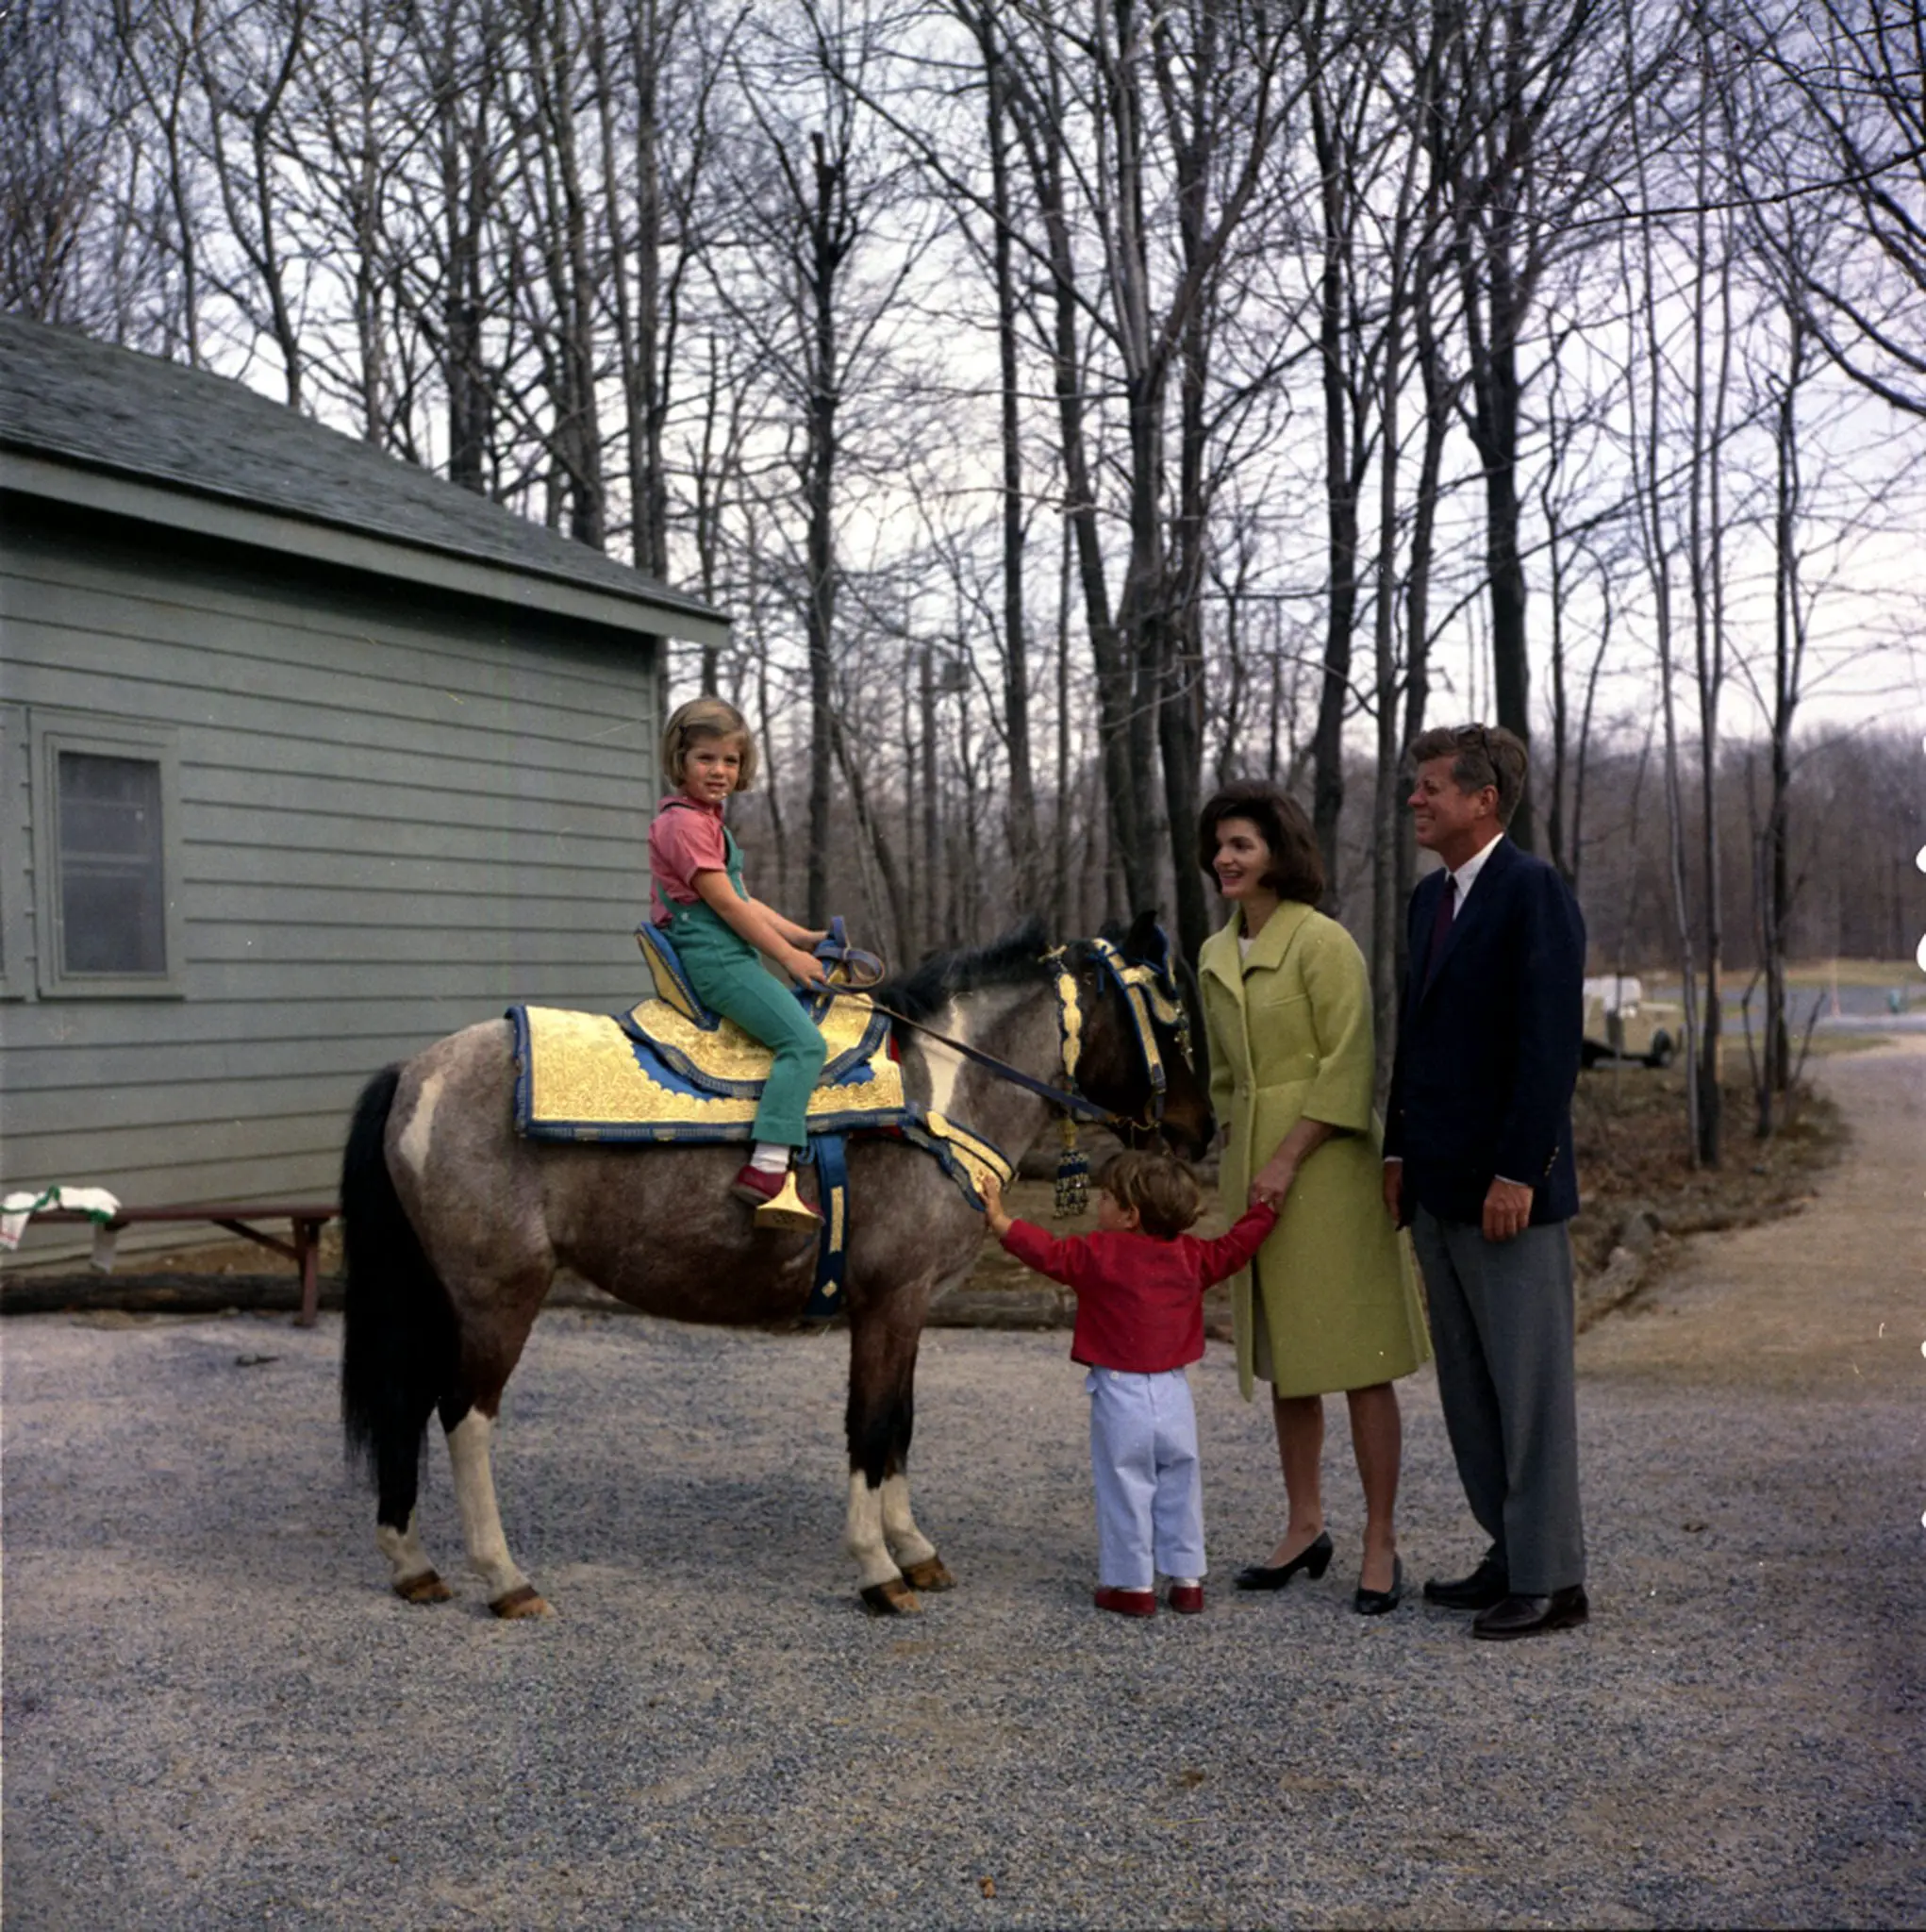 31 March 1963 President John F. Kennedy and family watch Caroline Kennedy riding a horse named "Tex" at Camp David.  "Tex" is wearing a blue and gold Moroccan saddle, a gift to President Kennedy from King Hassan II.  Photograph includes: (L-R) Caroline Kennedy, John F. Kennedy, Jr., First Lady Jacqueline Kennedy, and President Kennedy.  Camp David, Maryland.  Please credit "Robert Knudsen, White House/John F. Kennedy Presidential Library and Museum, Boston"